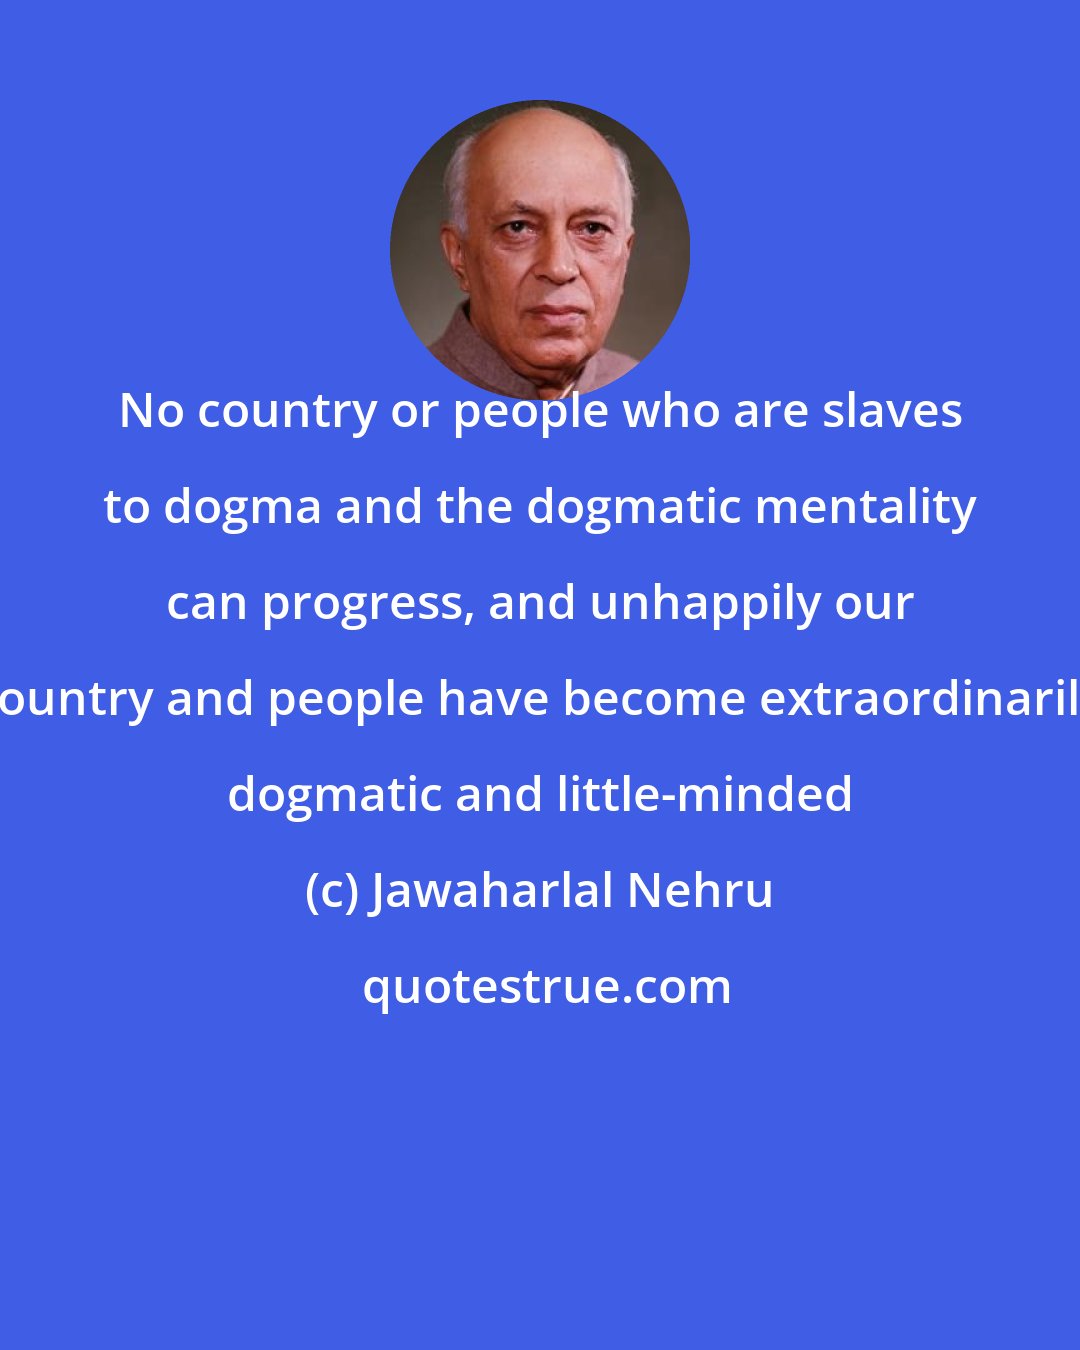 Jawaharlal Nehru: No country or people who are slaves to dogma and the dogmatic mentality can progress, and unhappily our country and people have become extraordinarily dogmatic and little-minded